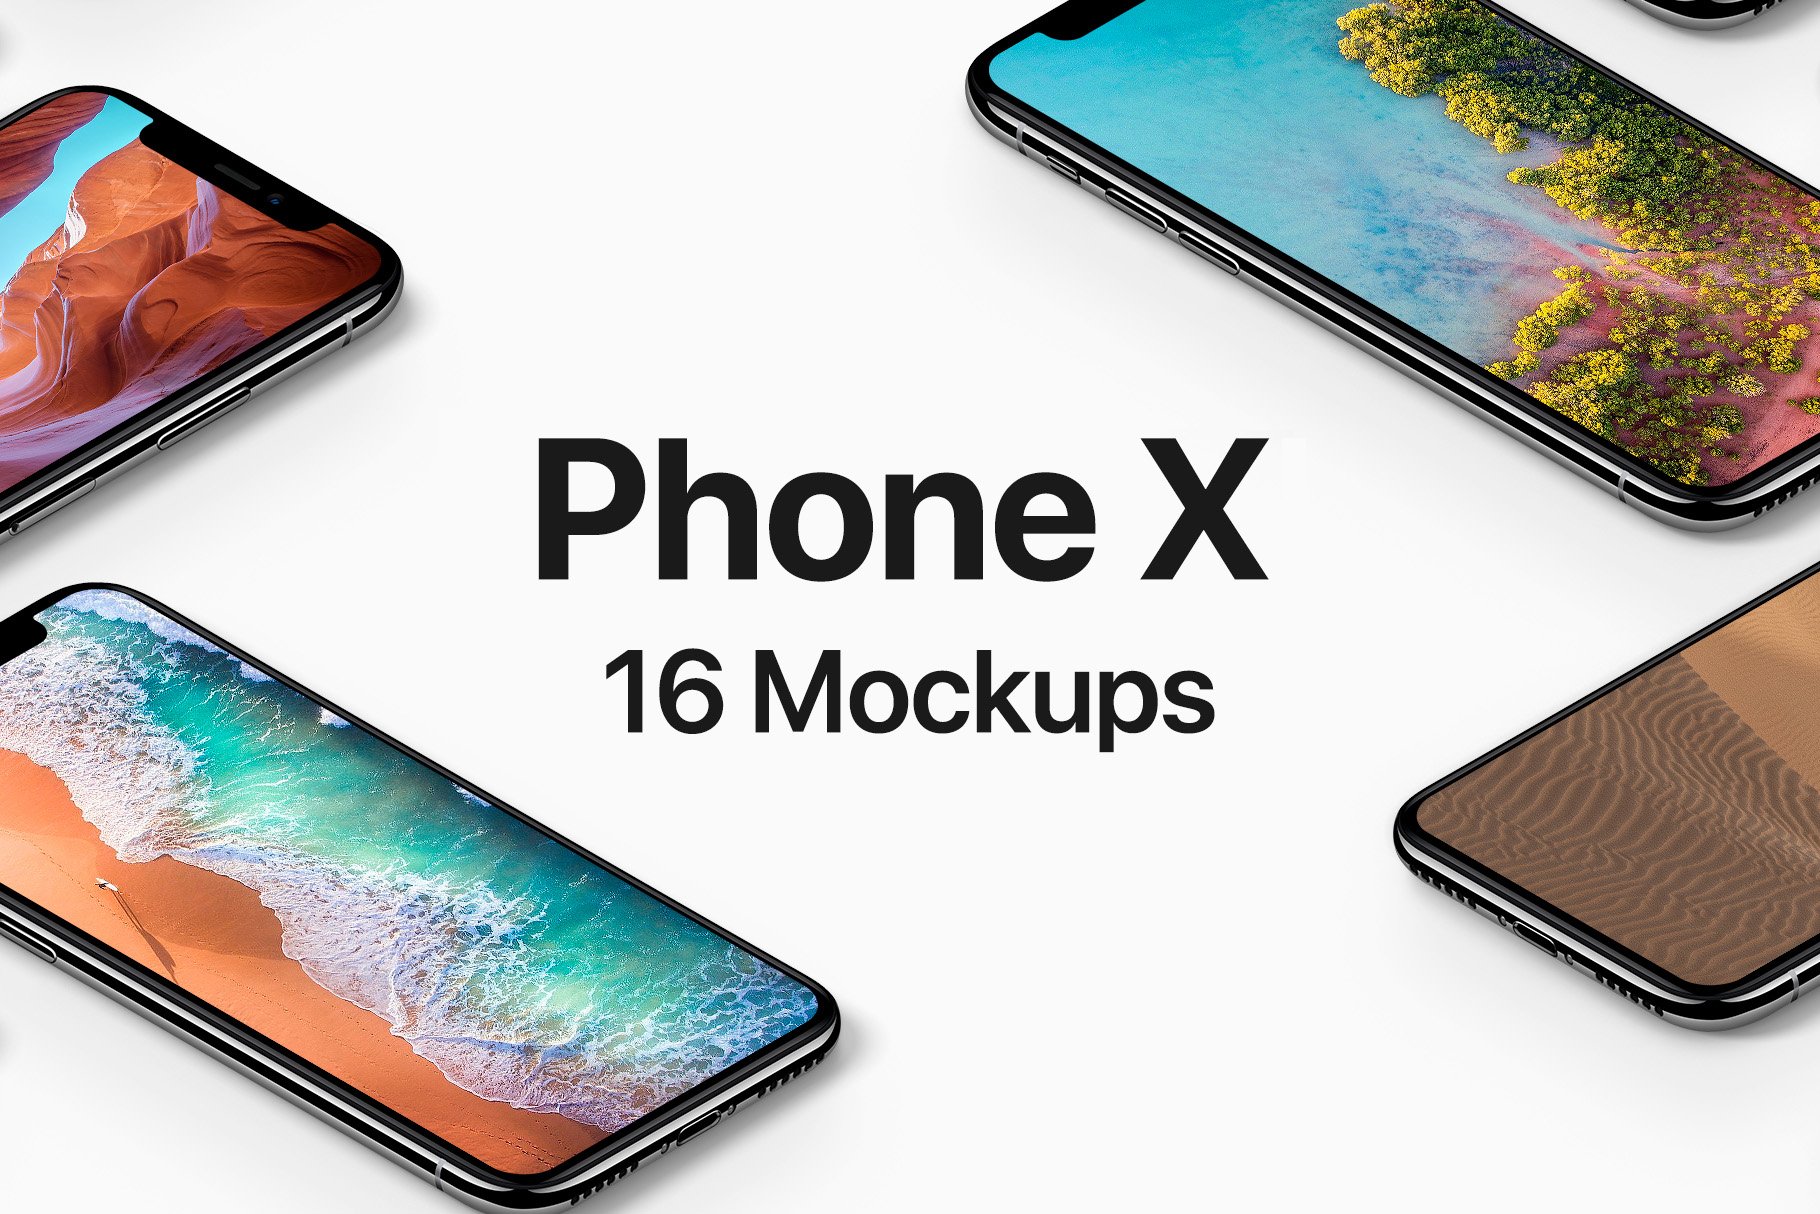 Phone X 16 Mockups cover image.